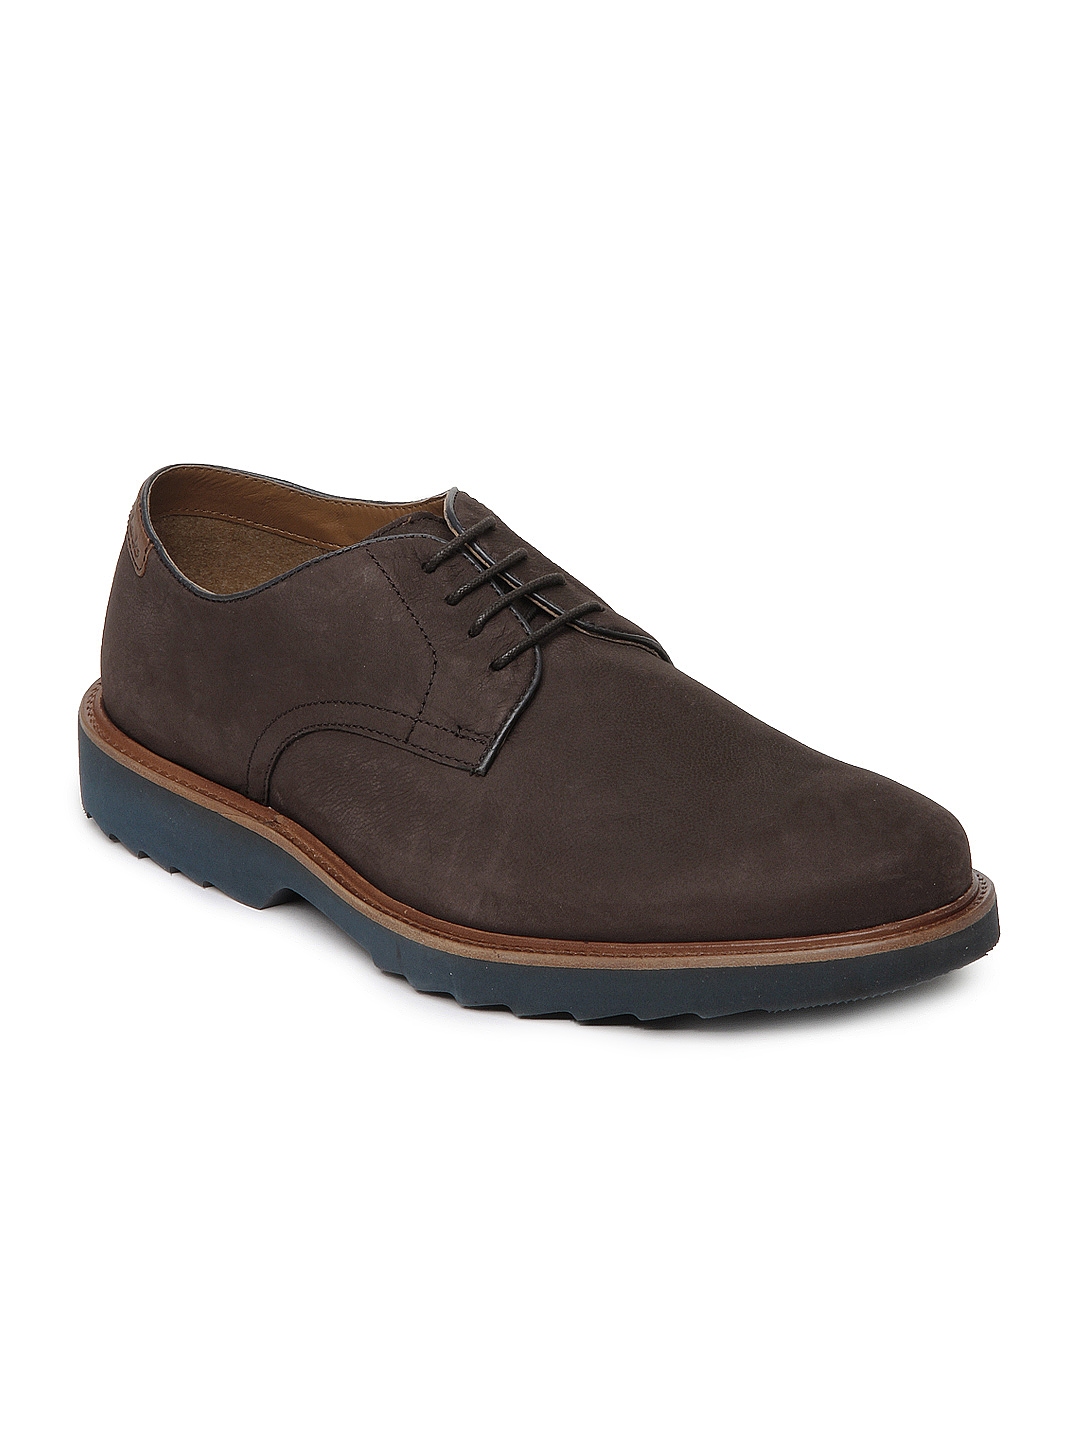 Buy Clarks Men Brown Leather Casual Shoes - Casual Shoes for Men 224247 ...